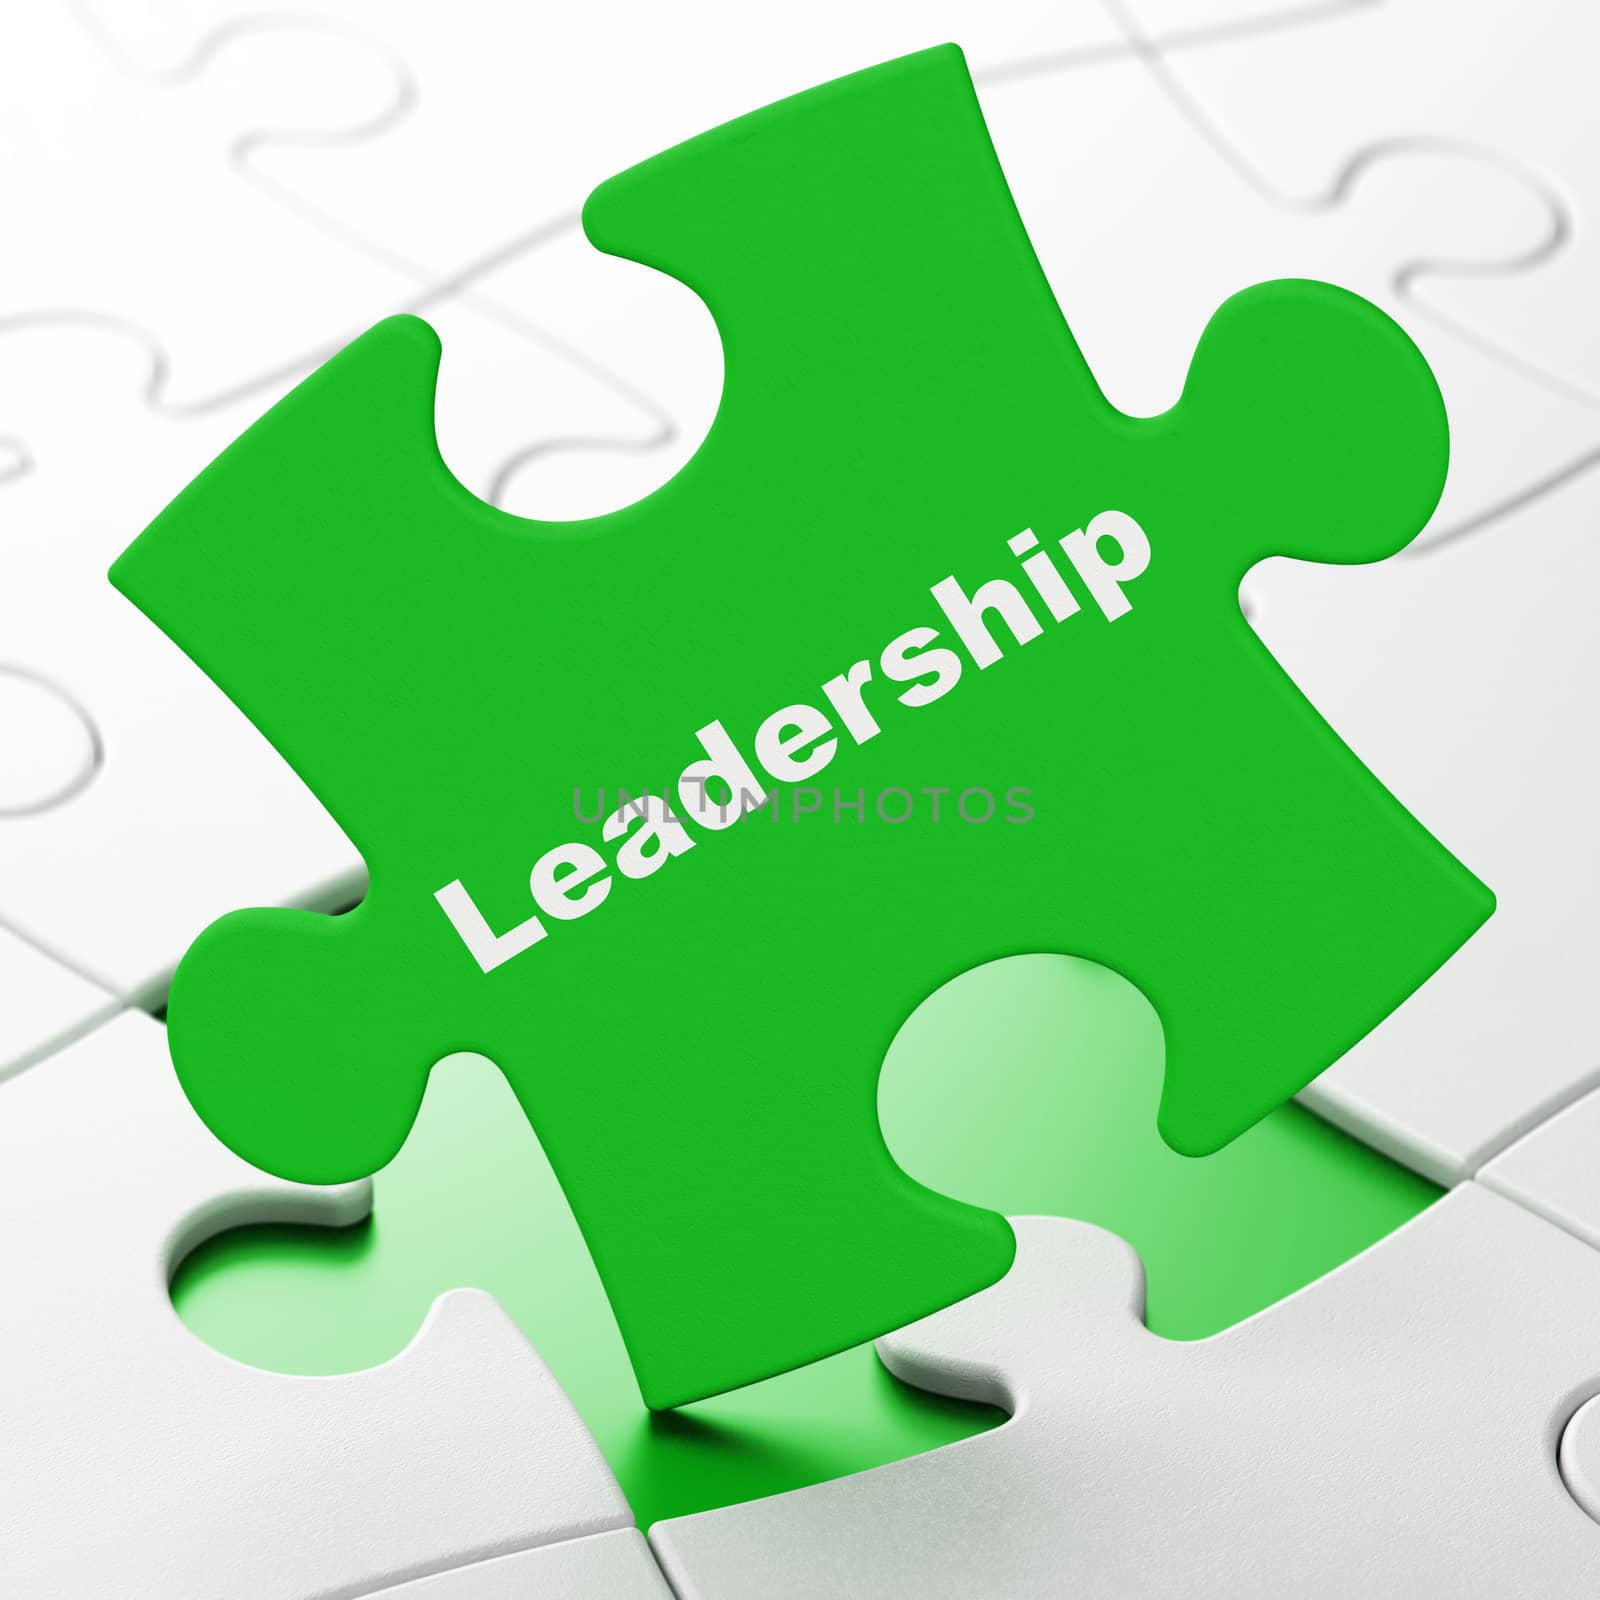 Business concept: Leadership on Green puzzle pieces background, 3d render